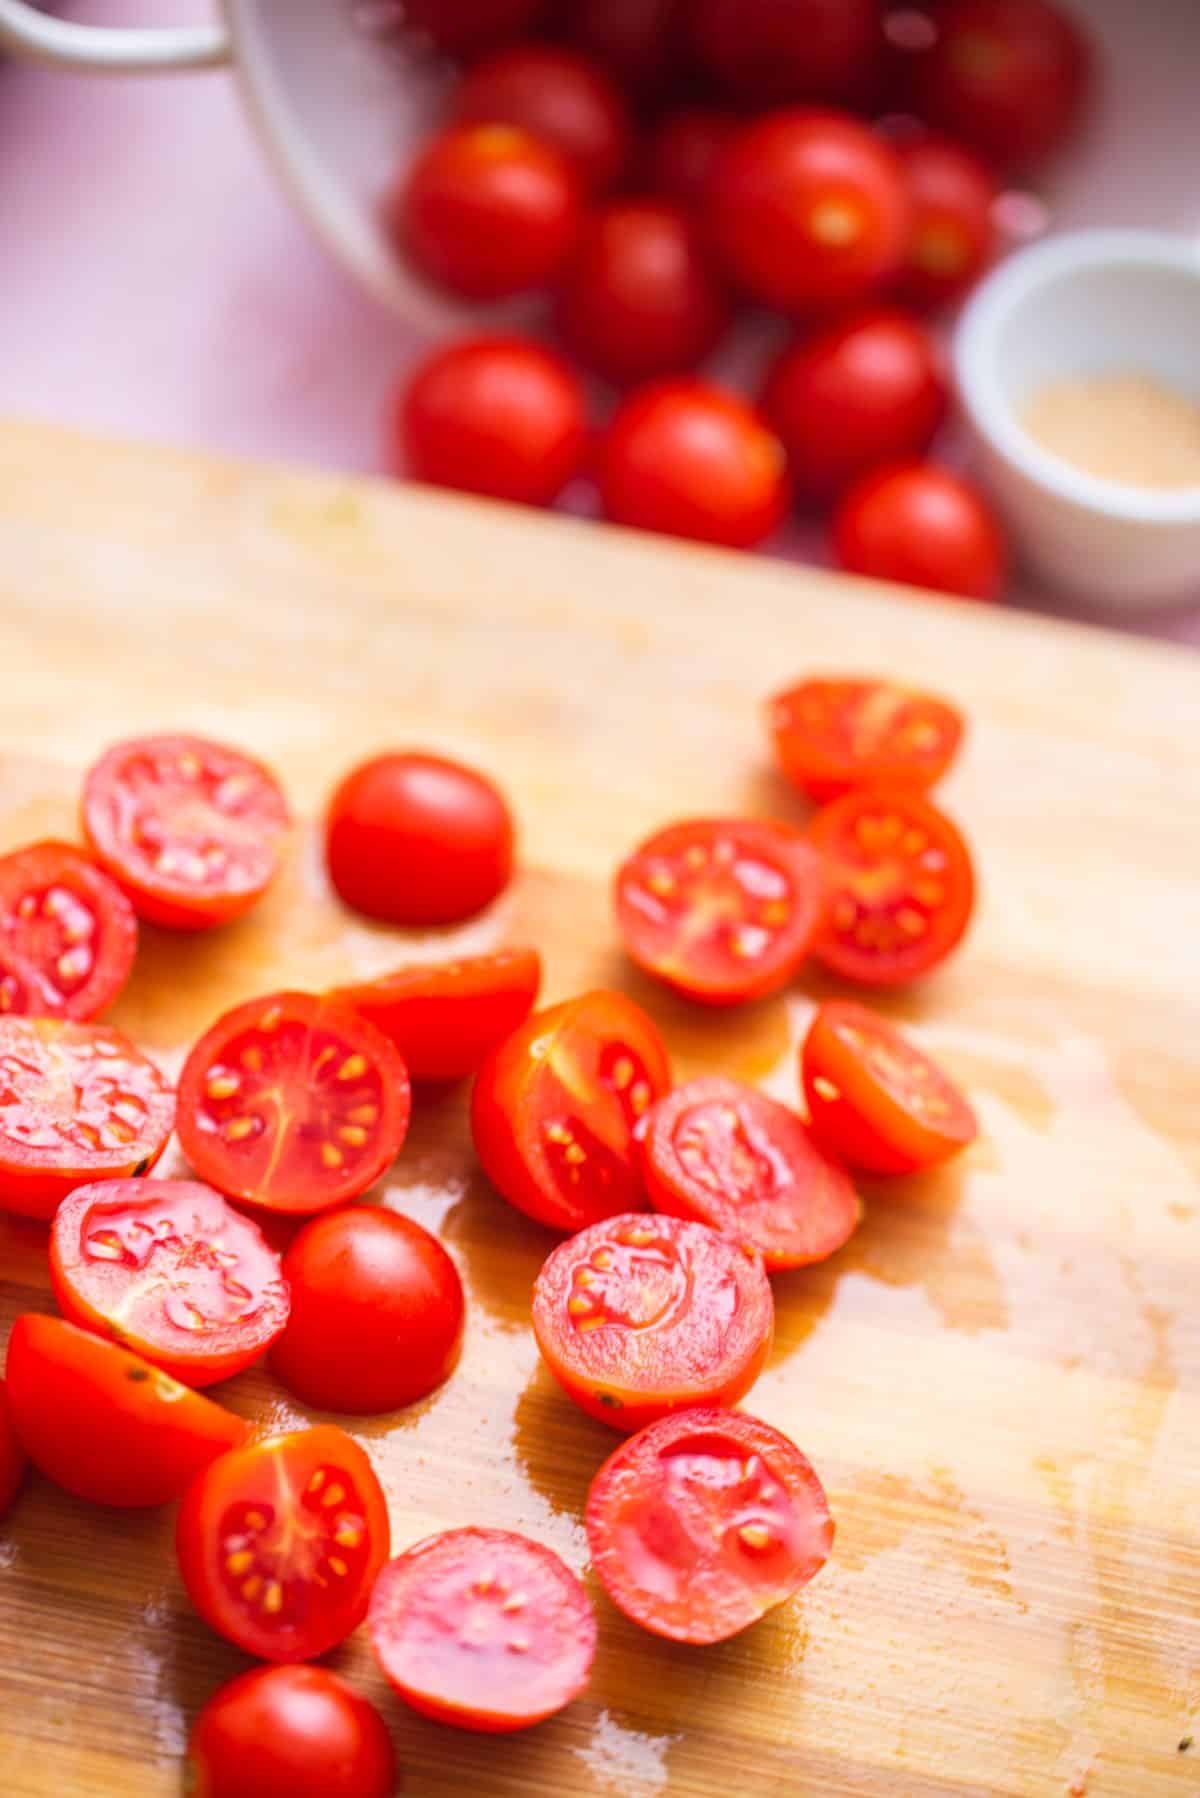 chopped tomatoes in halves